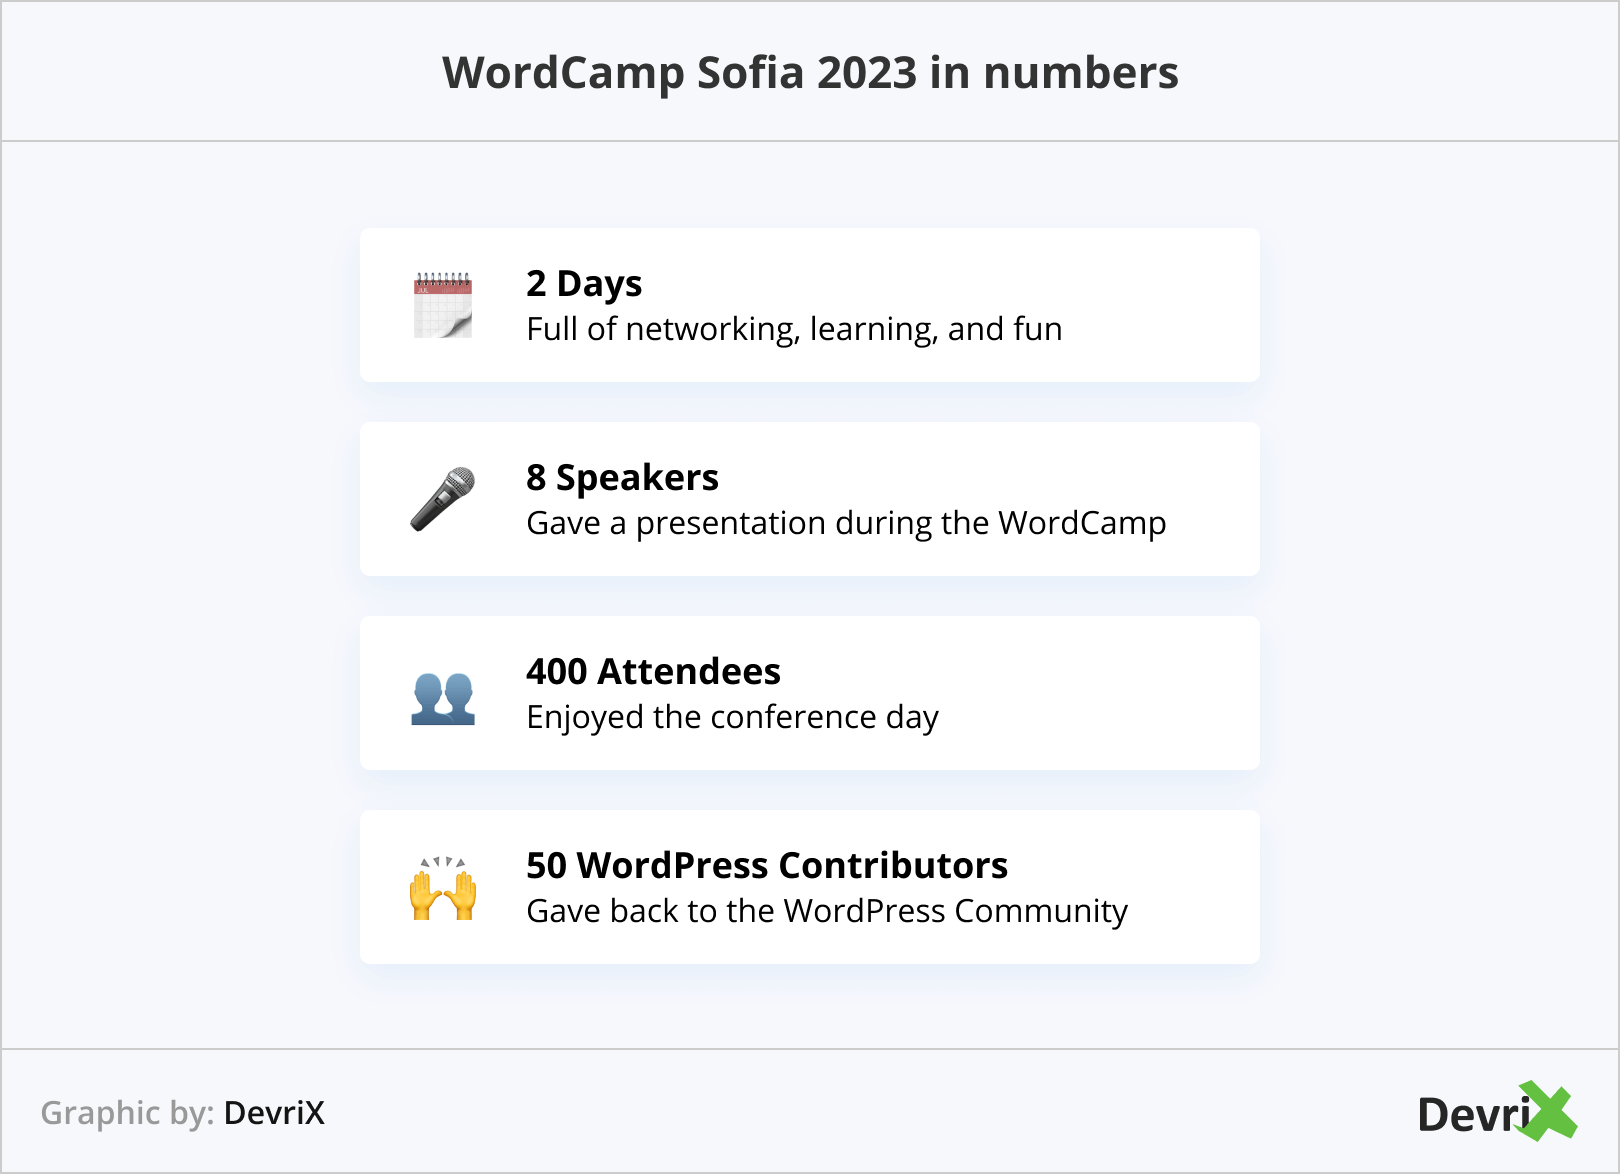 WordCamp Sofia 2023 in numbers